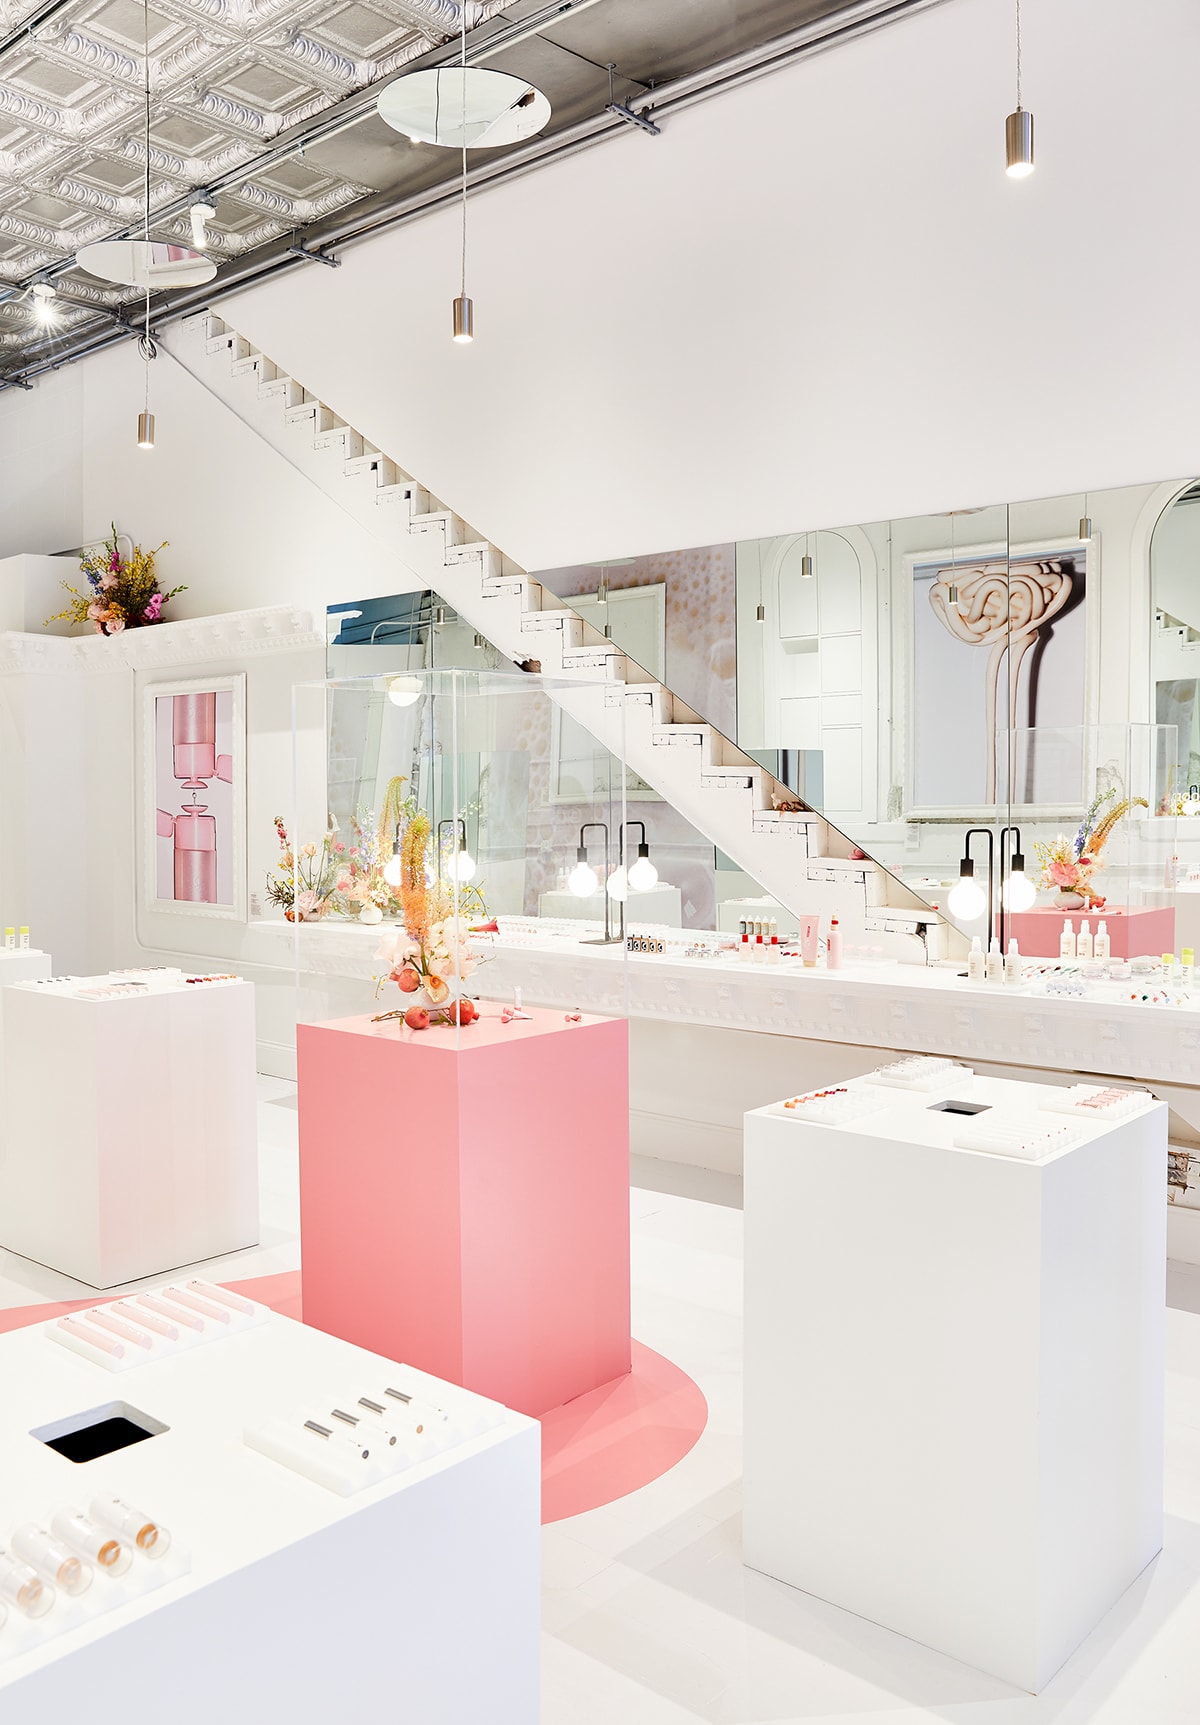 Glossier Chicago Retail Experience Pop-Up Shop Store August 23 Makeup Skincare Beauty Emily Weiss Interior